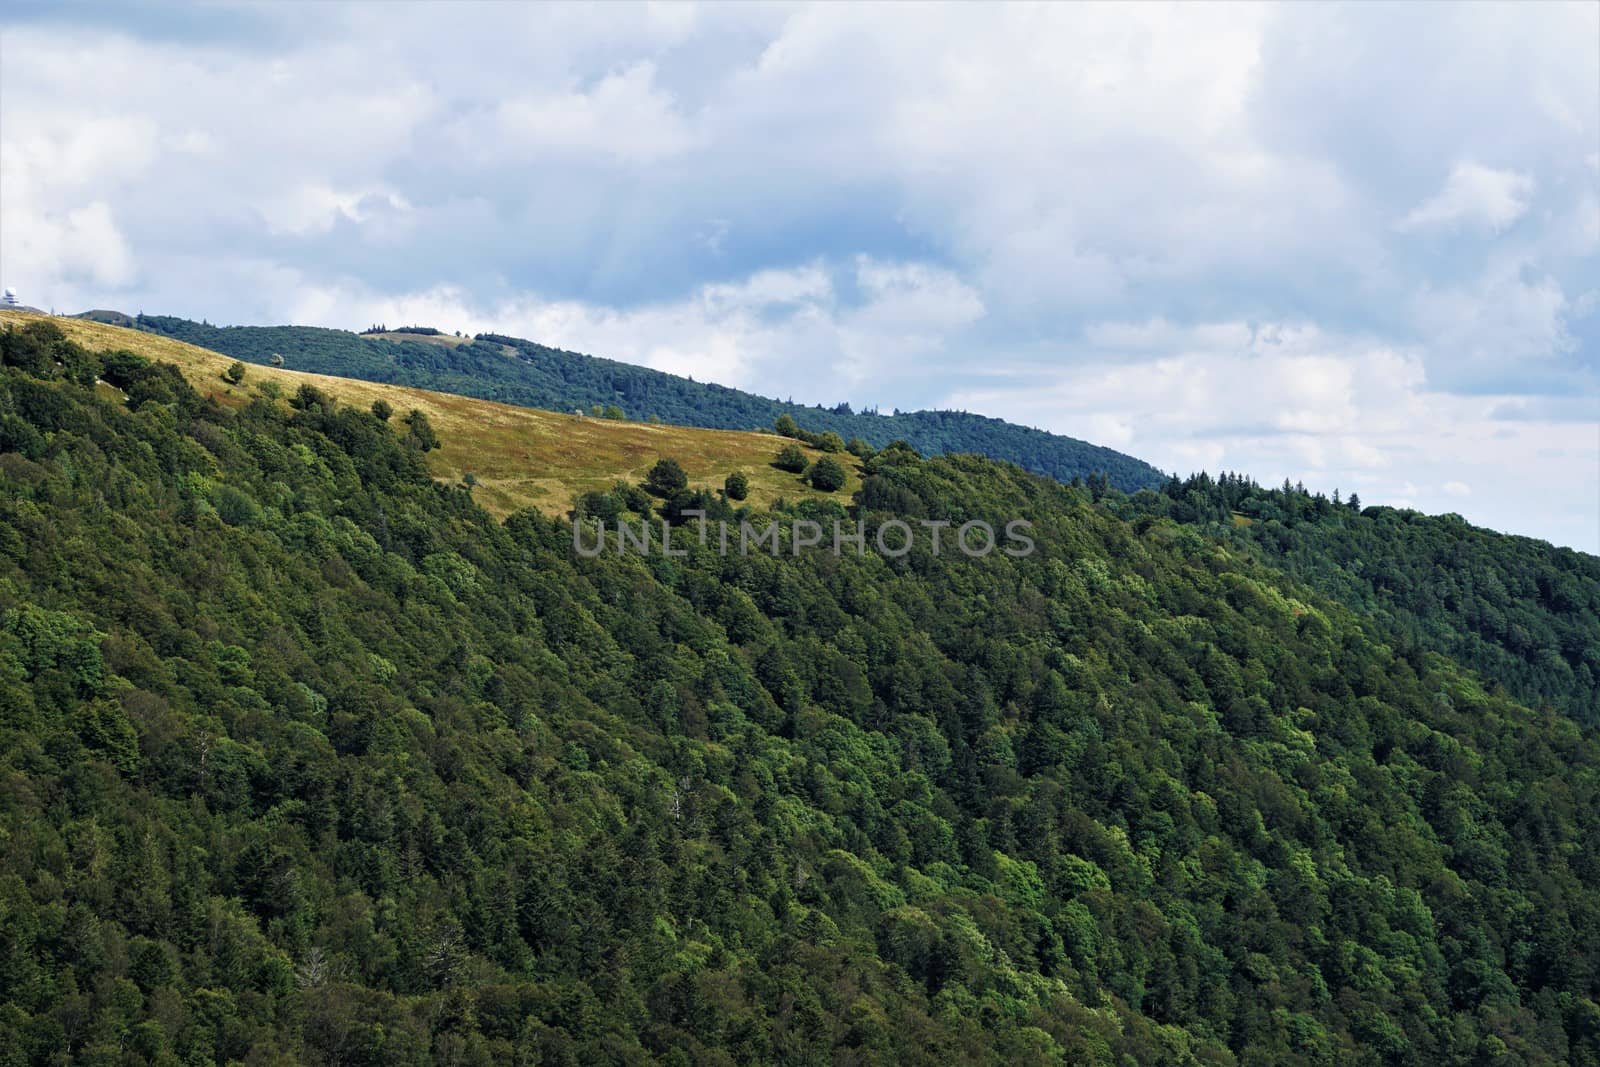 Tree less mountain tops with forest at the flanks spotted in the Vosges, France